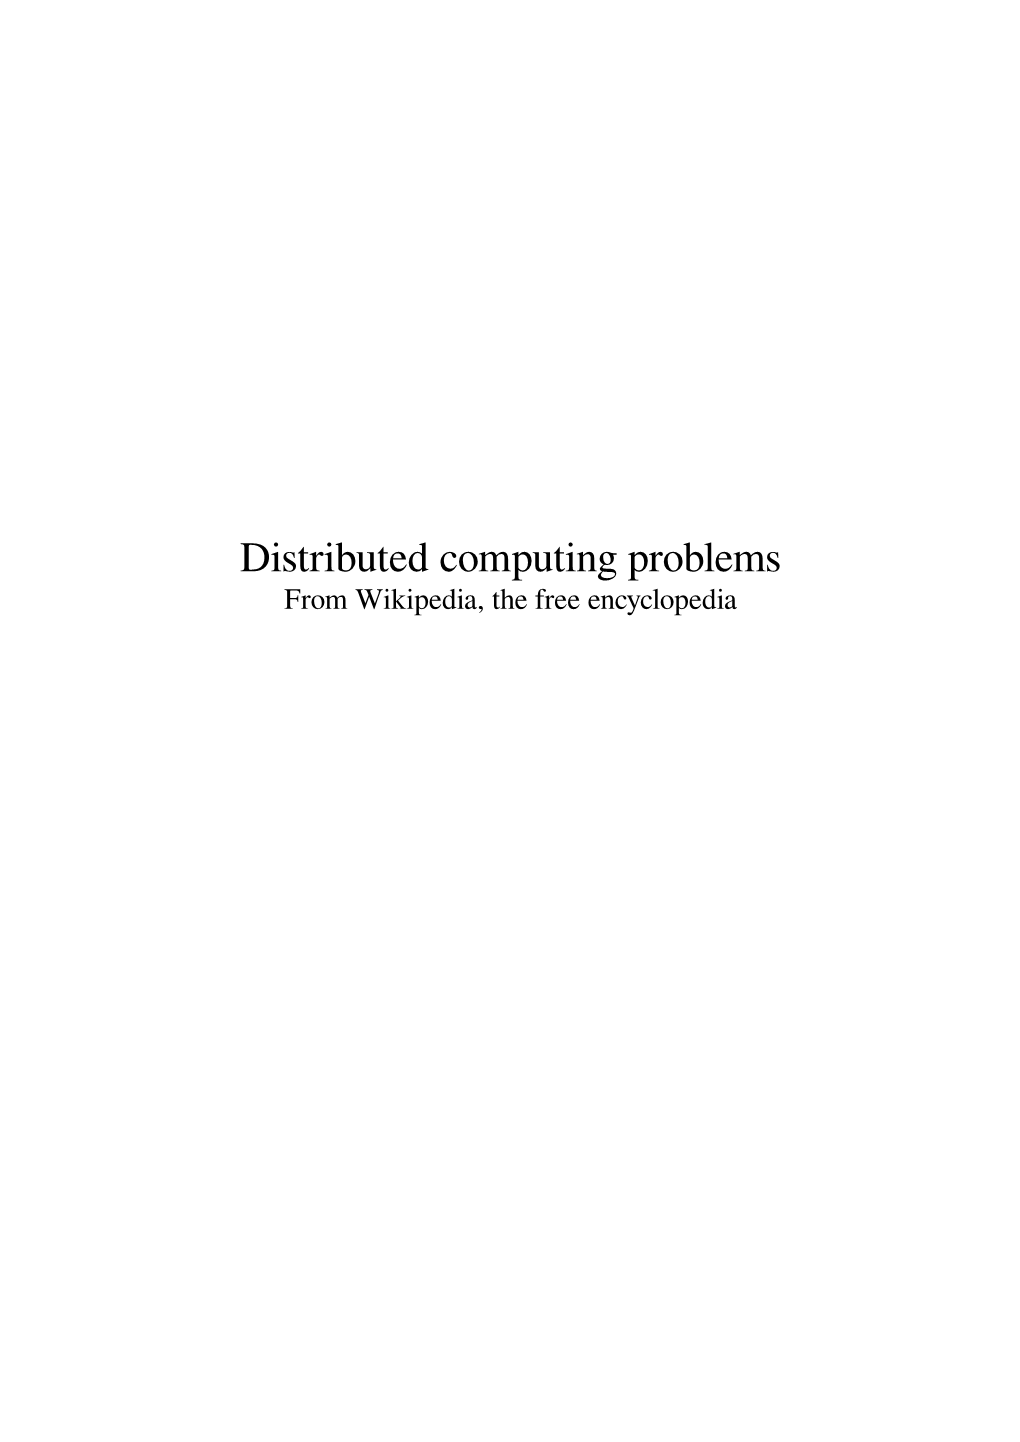 Distributed Computing Problems from Wikipedia, the Free Encyclopedia Contents